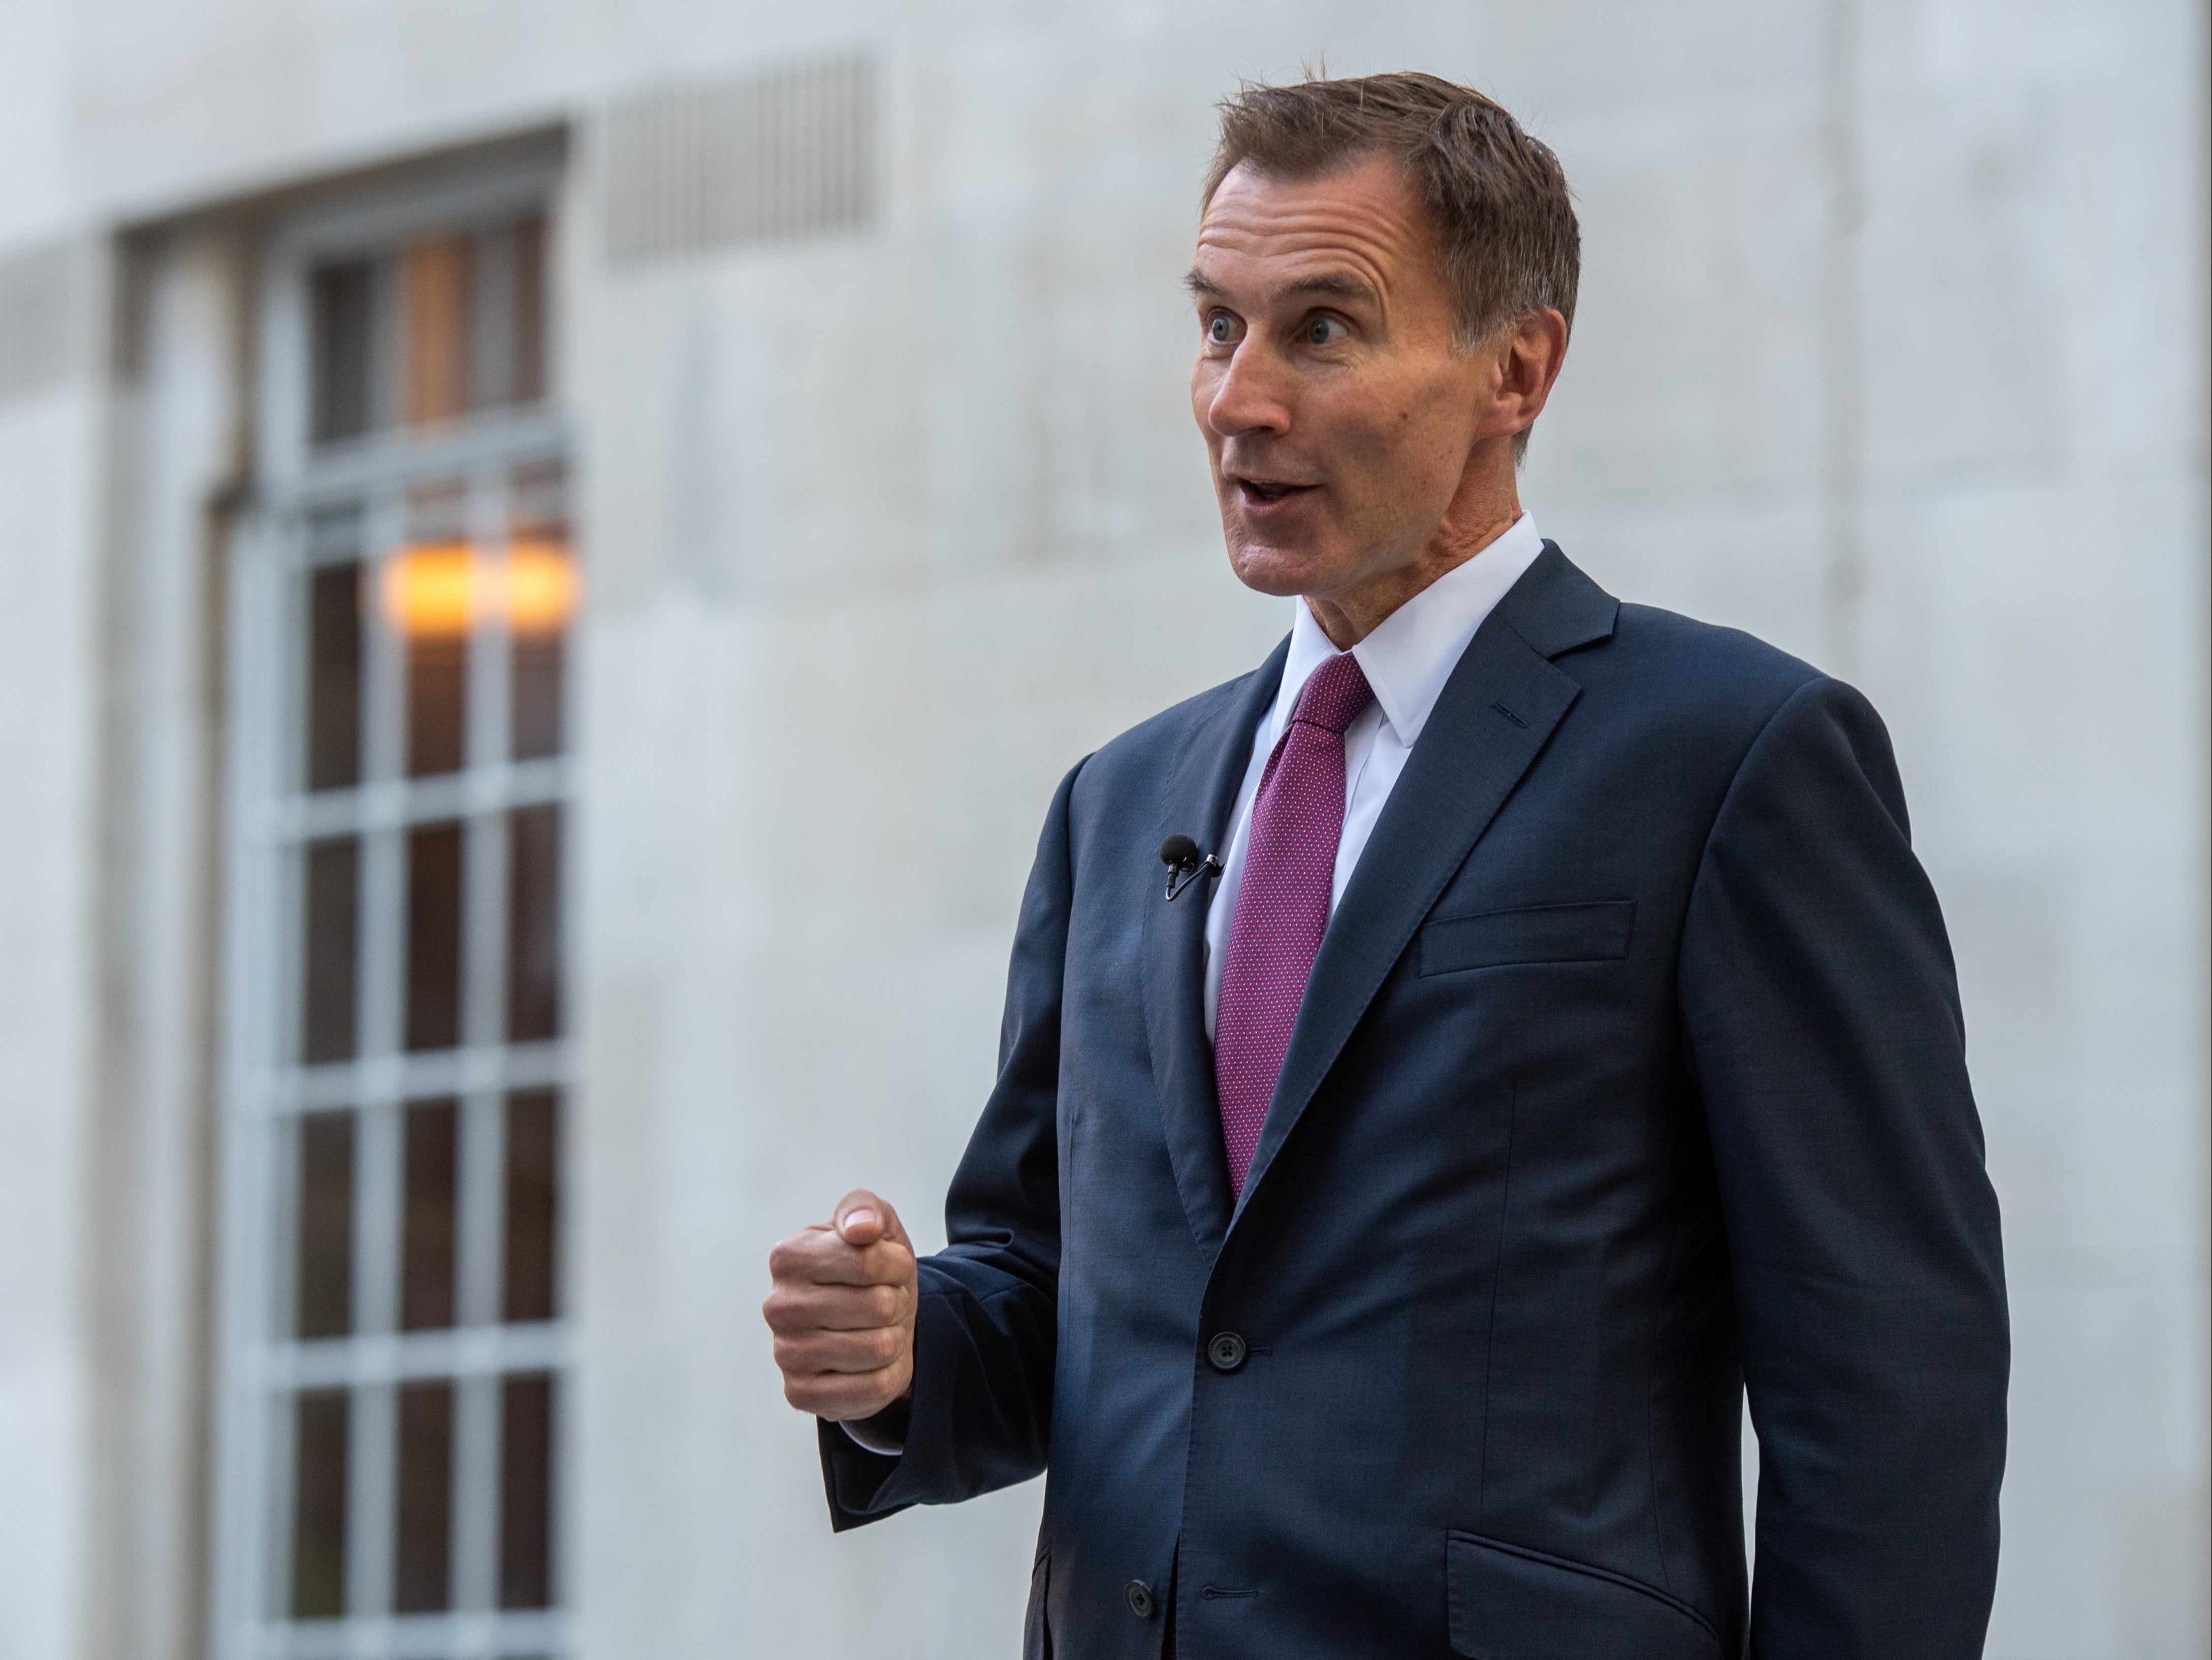 Jeremy Hunt was appointed as the new UK chancellor on Friday